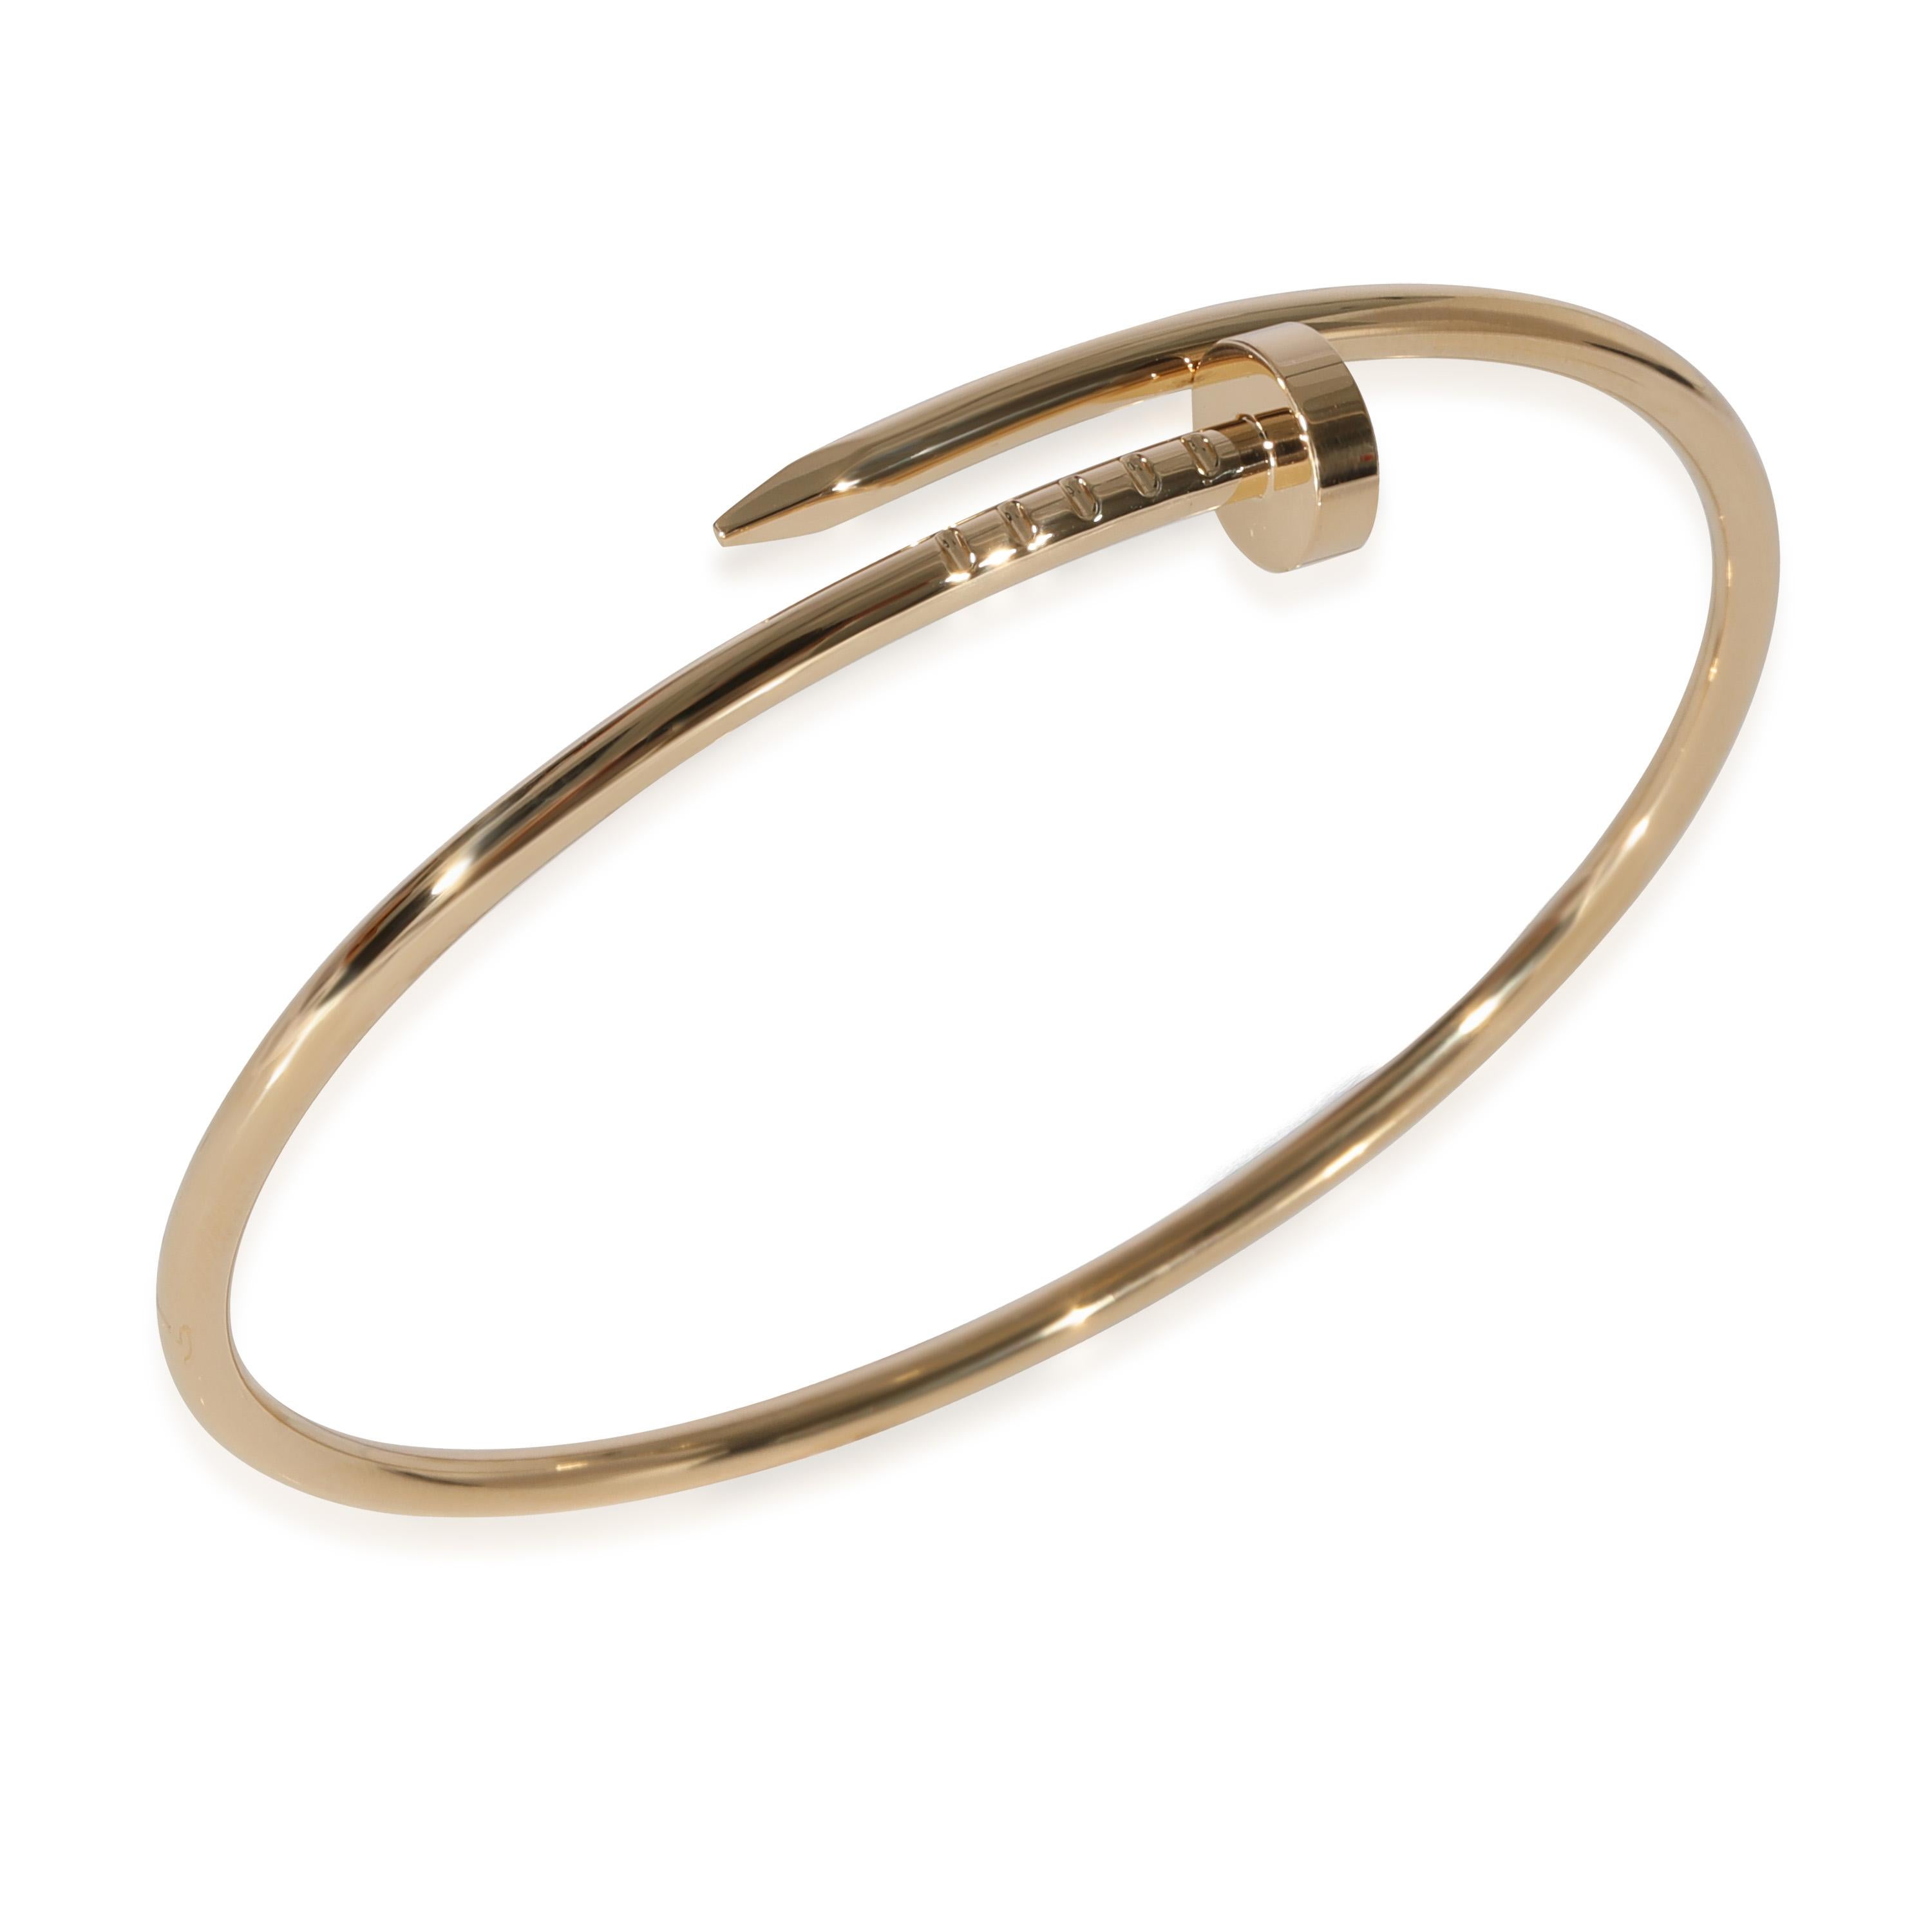 Cartier Juste Un Clou Bracelet in 18k Yellow Gold

PRIMARY DETAILS
SKU: 125937
Listing Title: Cartier Juste Un Clou Bracelet in 18k Yellow Gold
Condition Description: Retails for 4750 USD. In excellent condition. Cartier size 17. Comes with